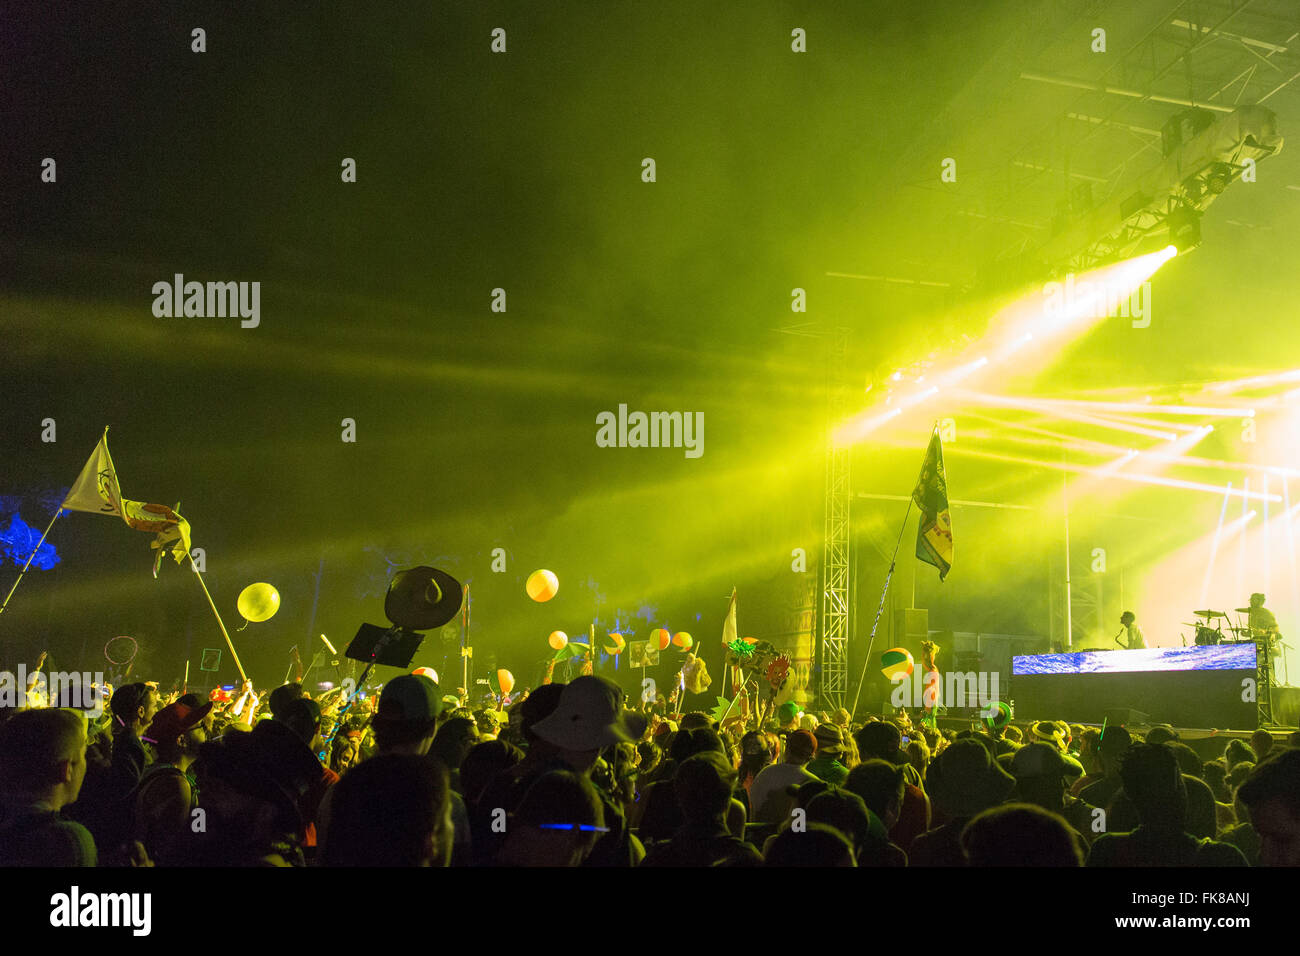 March 5, 2016 - Okeechobee, Florida, U.S - Light spills from the stage during Big Gigantic at the Okeechobee Music Festival in Okeechobee, Florida (Credit Image: © Daniel DeSlover via ZUMA Wire) Stock Photo